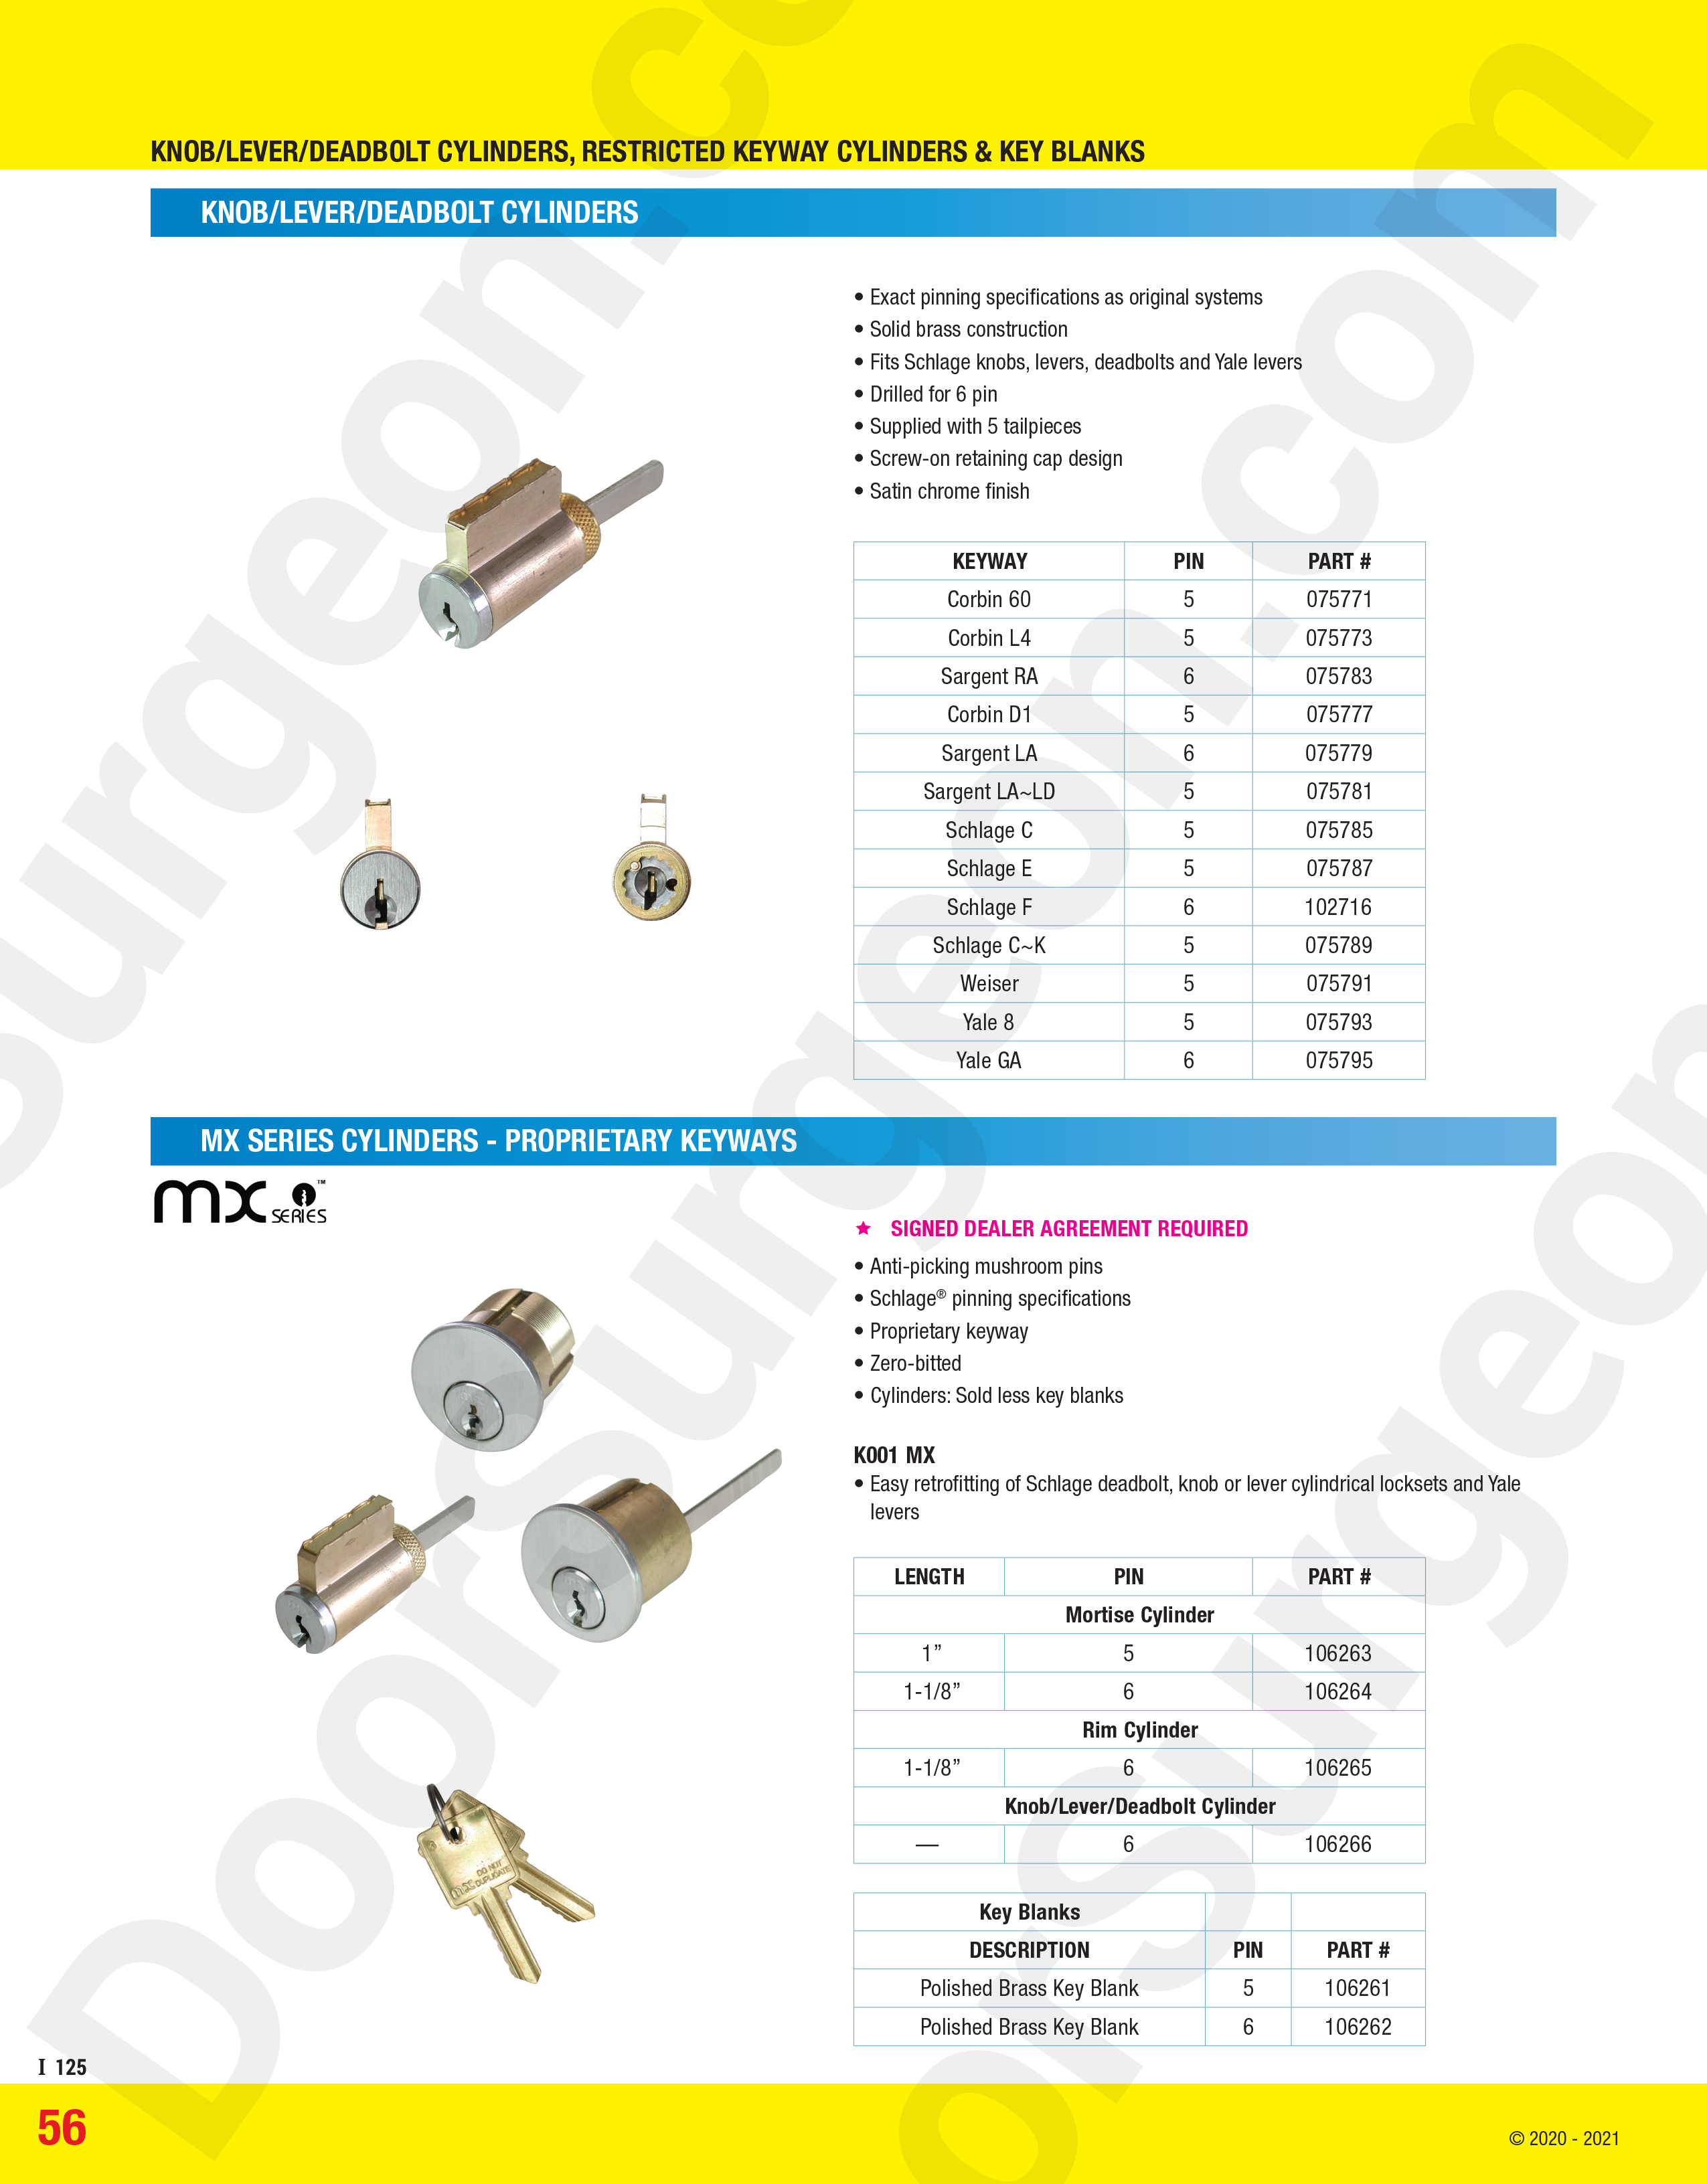 Mortise cylinder cams and key blanks.